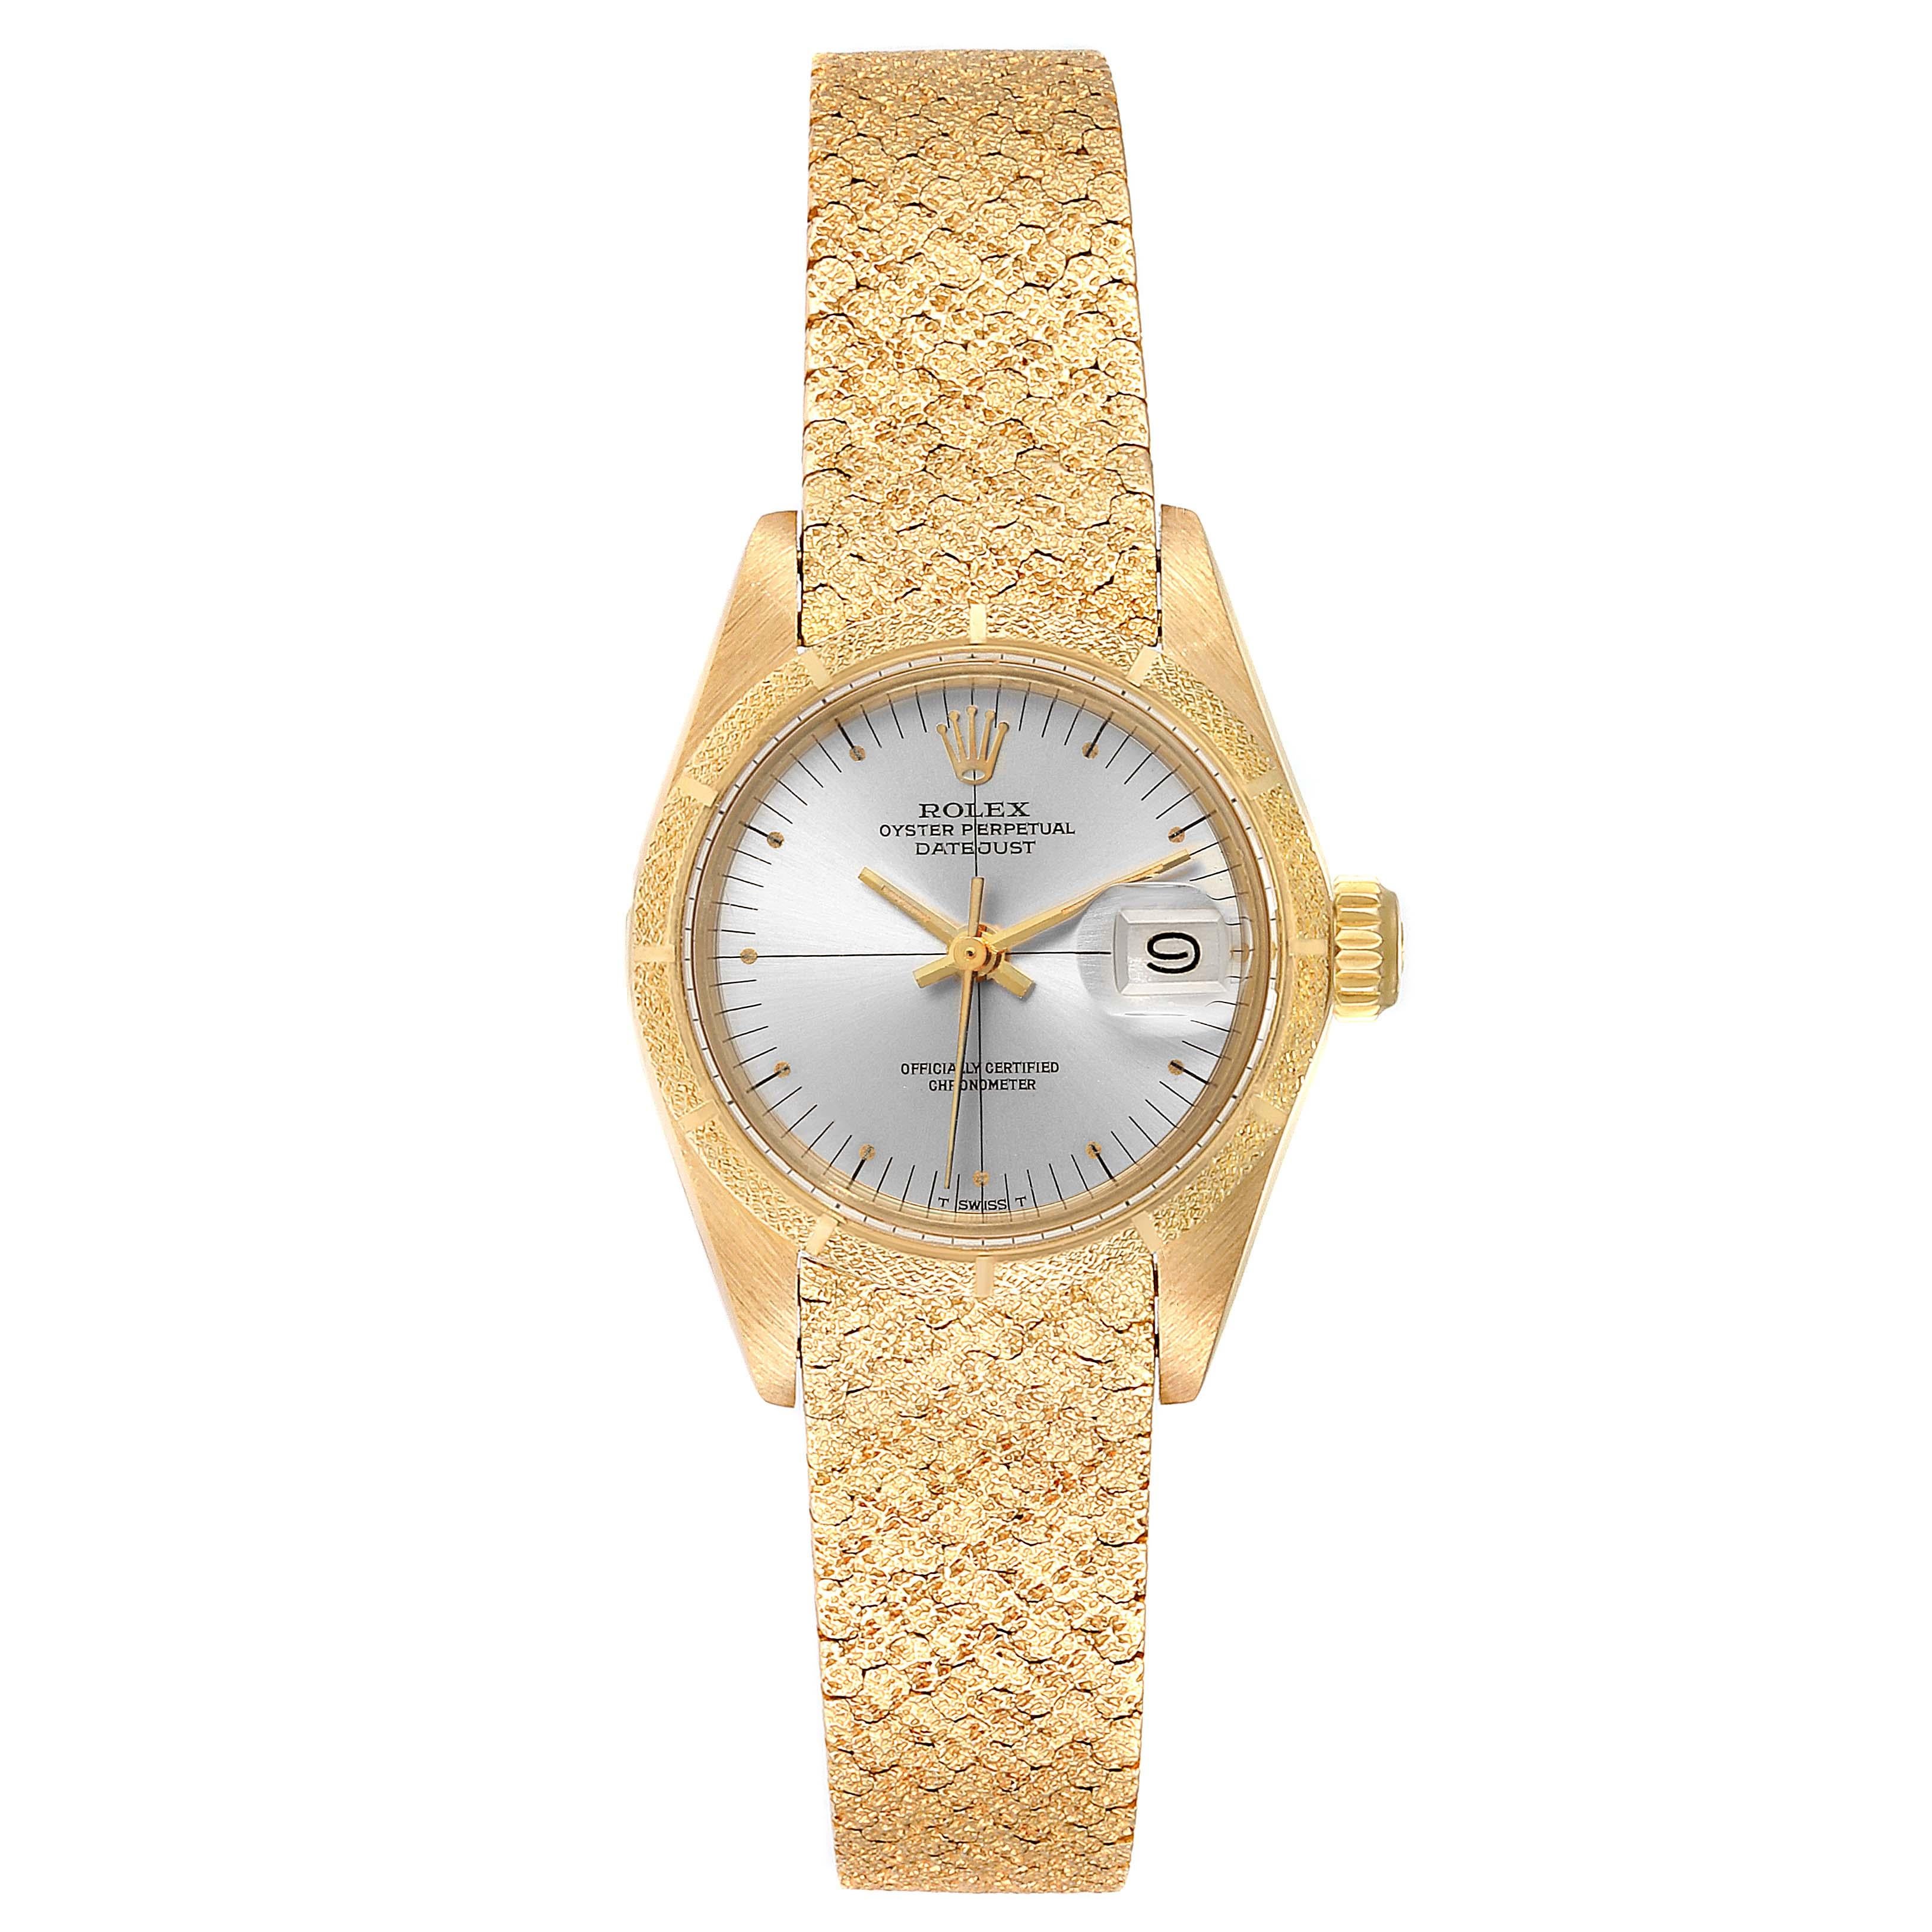 Rolex President Datejust Yellow Gold Ladies Watch 6900. Officially certified chronometer self-winding movement. 18k yellow gold oyster case 26 mm in diameter. Rolex logo on a crown. 18k yellow gold florentine finish bezel. Acrylic crystal with